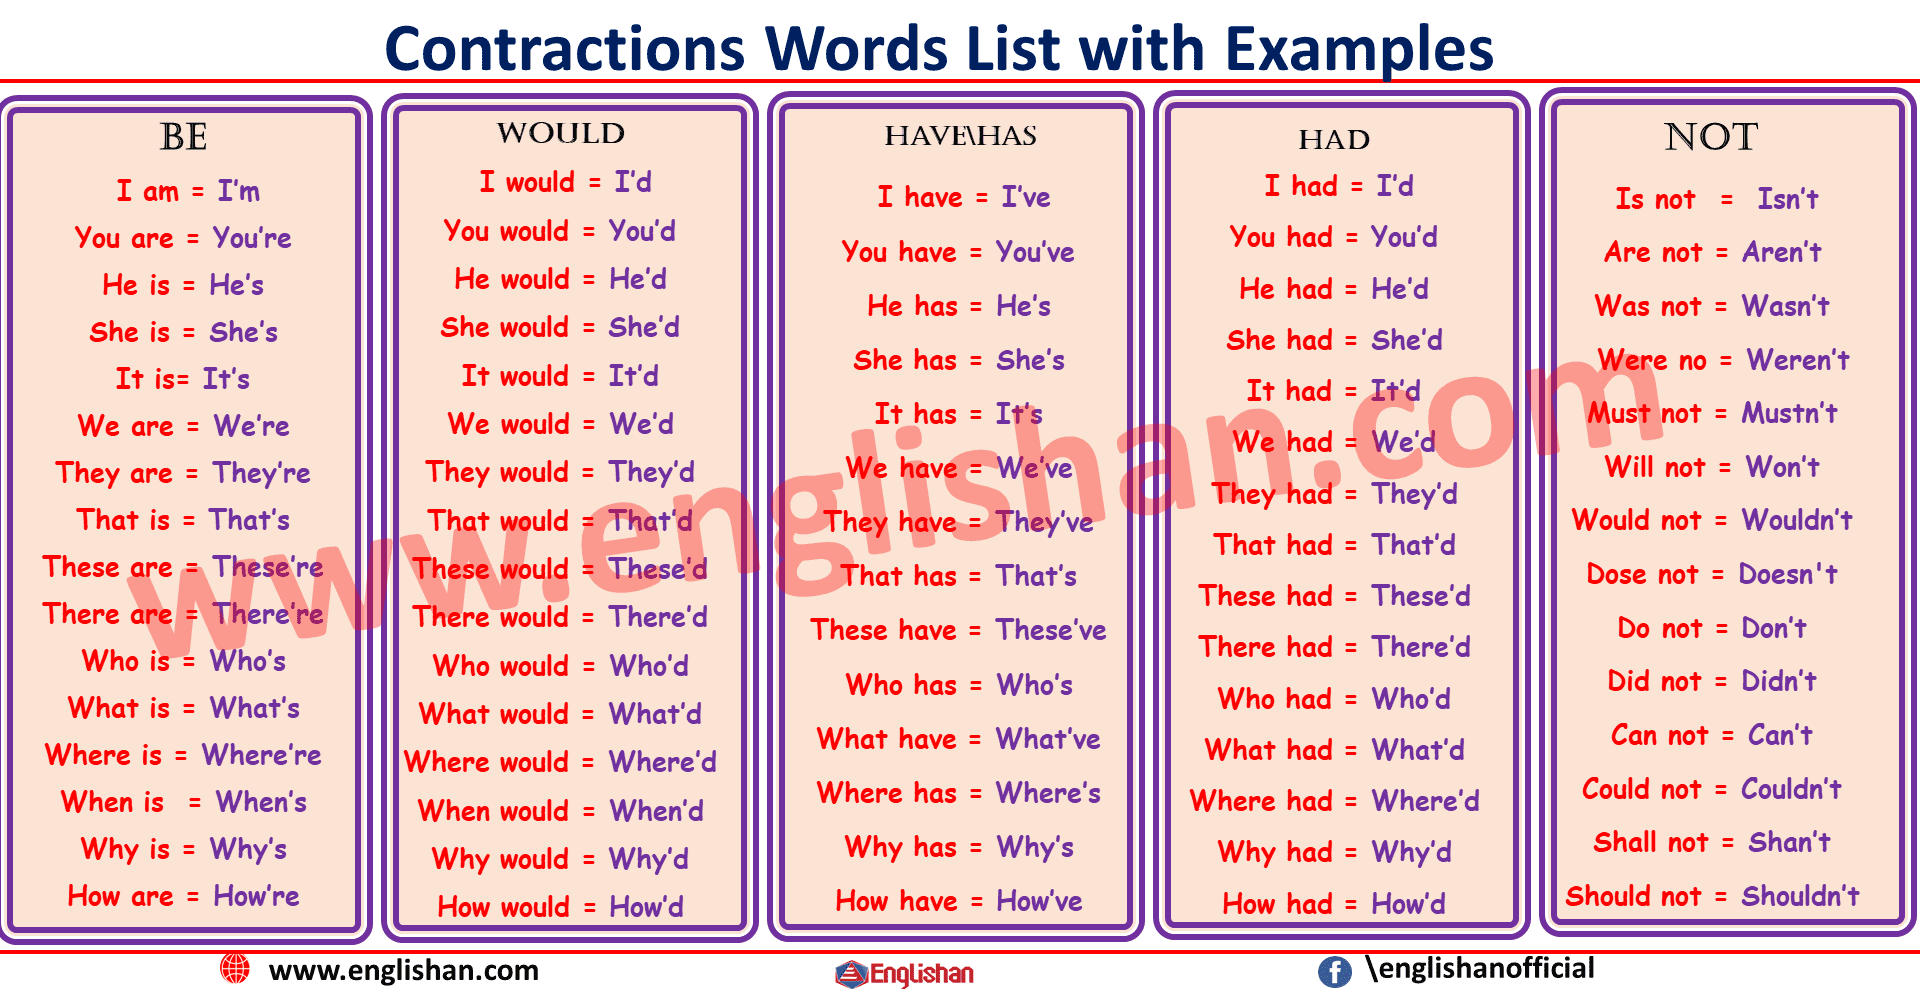 What Are Contractions in English Grammar?